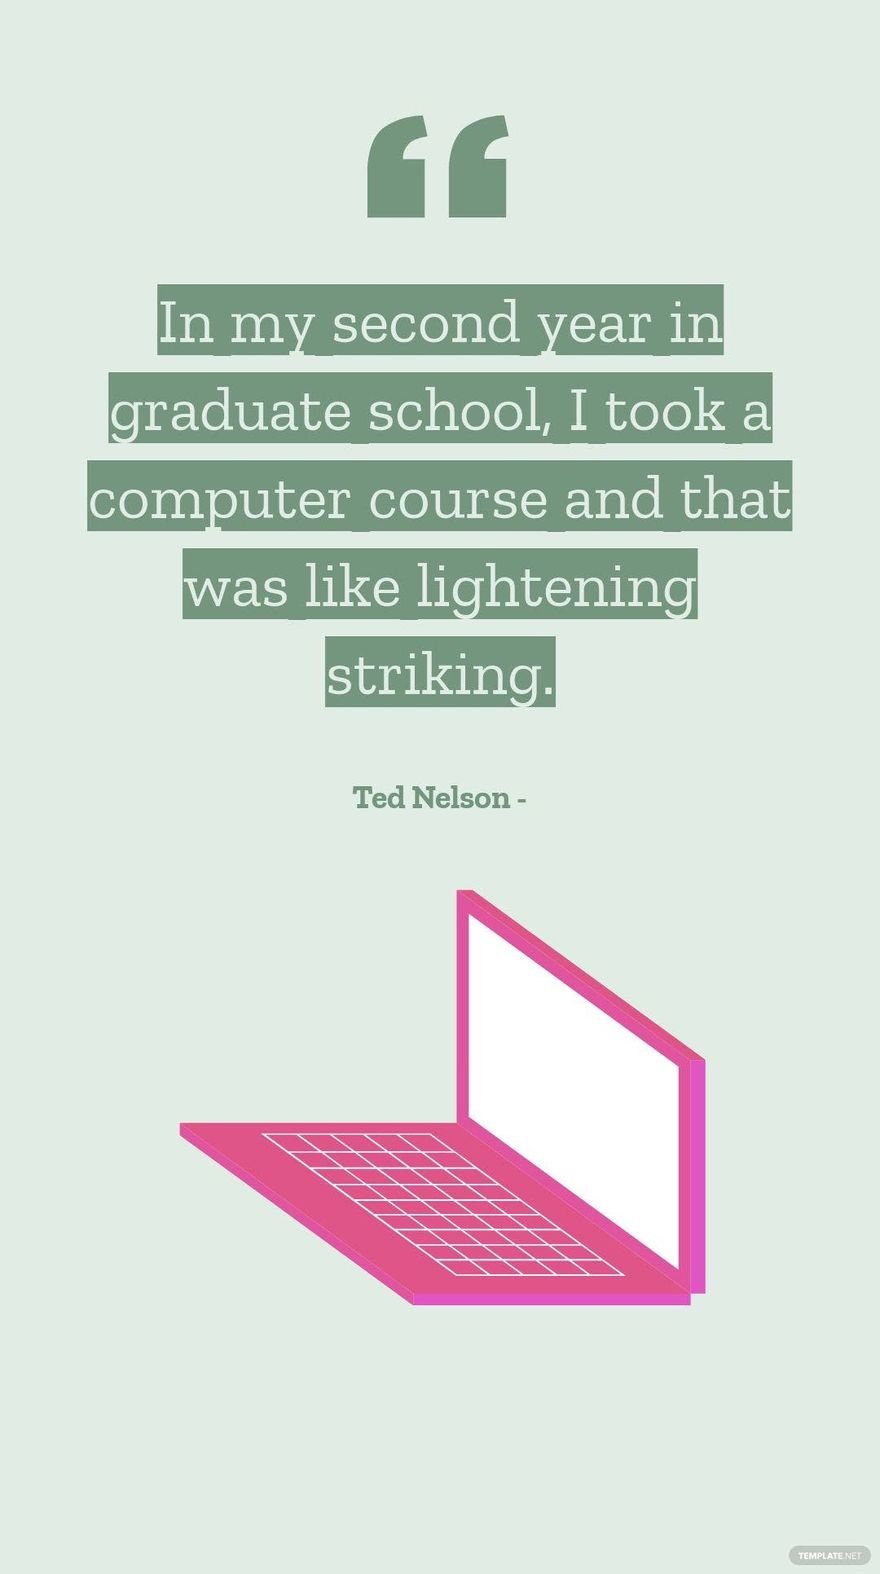 Ted Nelson - In my second year in graduate school, I took a computer course and that was like lightening striking. in JPG